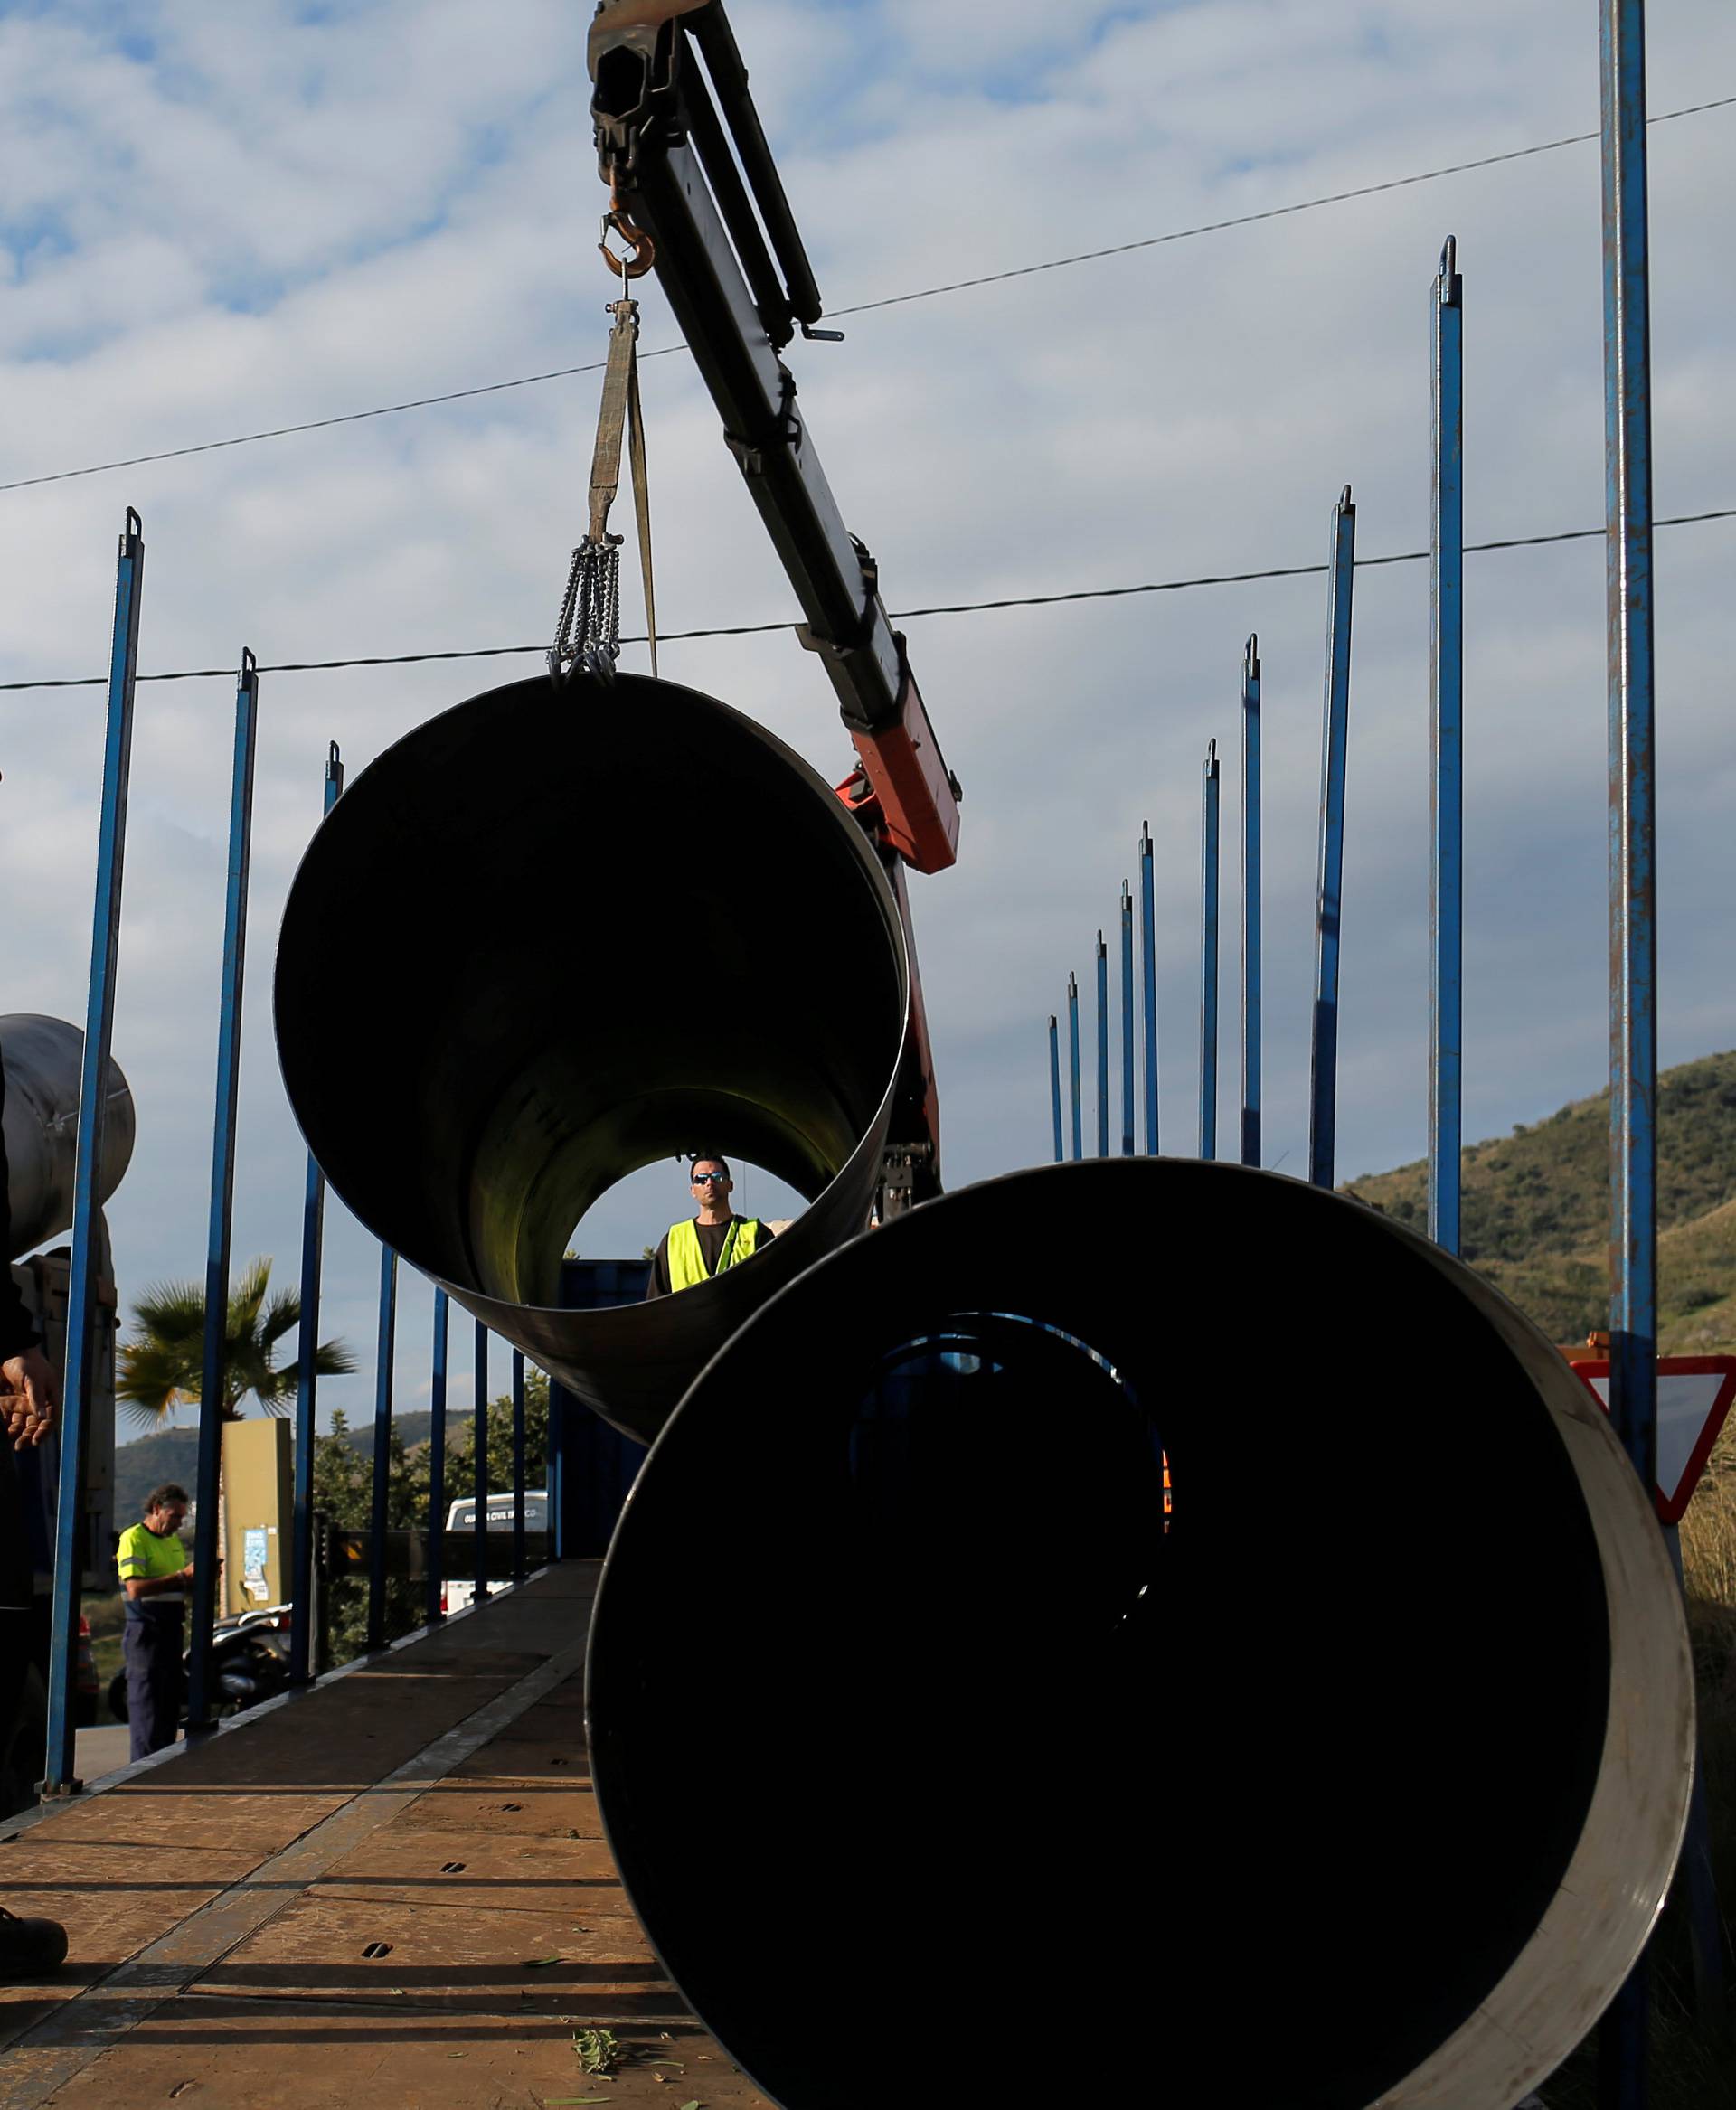 Workers move steels tubes, which will be used to protect a deep well, next to the area where Julen, a Spanish two-year-old boy fell into the well four days ago when the family was taking a stroll through a private estate, in Totalan